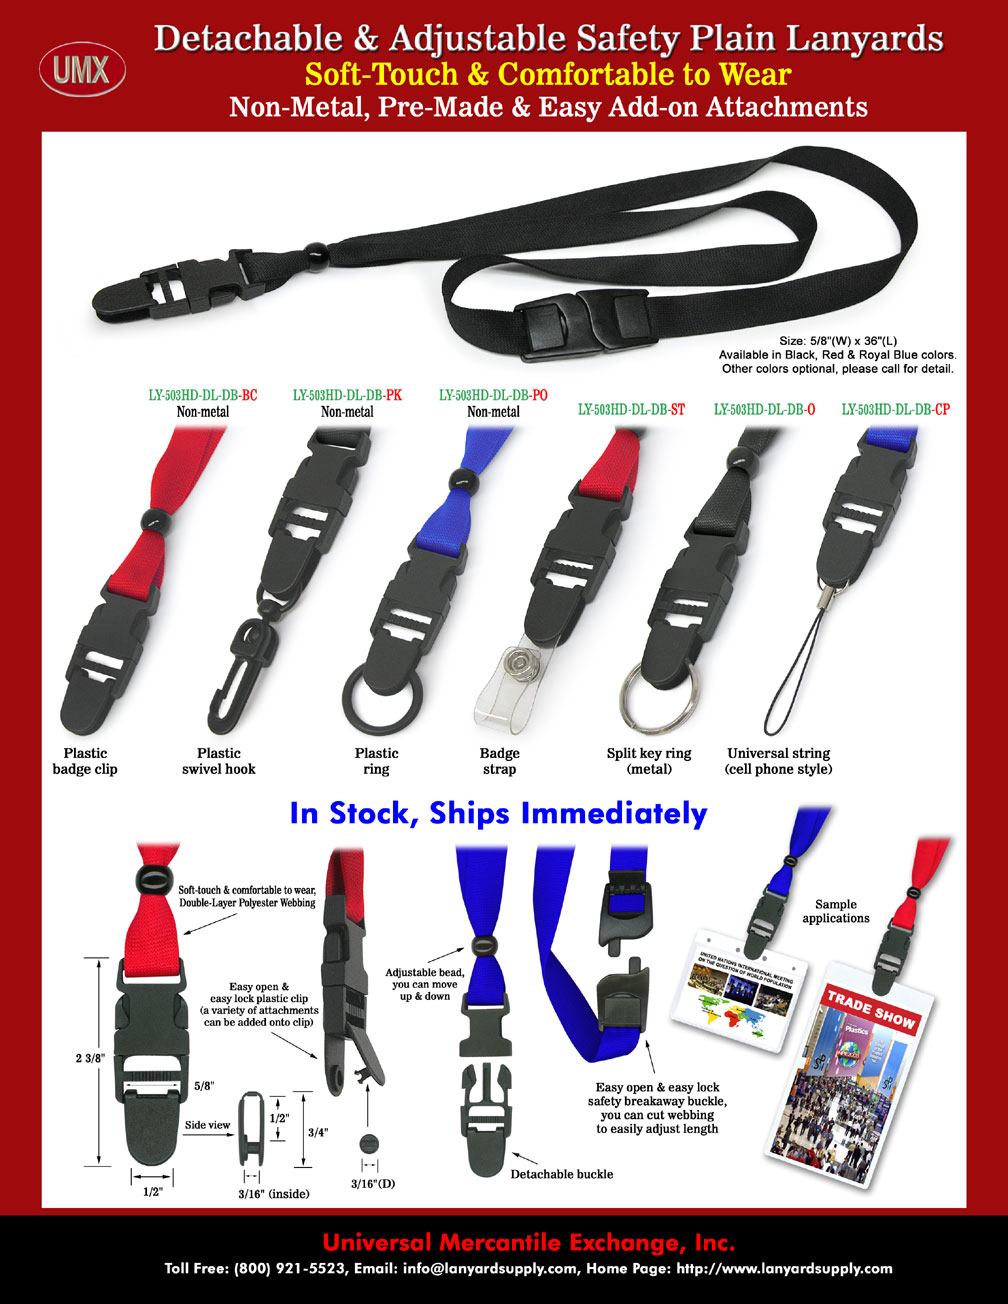 All In One Plain Lanyards With Detachable and Adjustable and Safety Breakaway Function